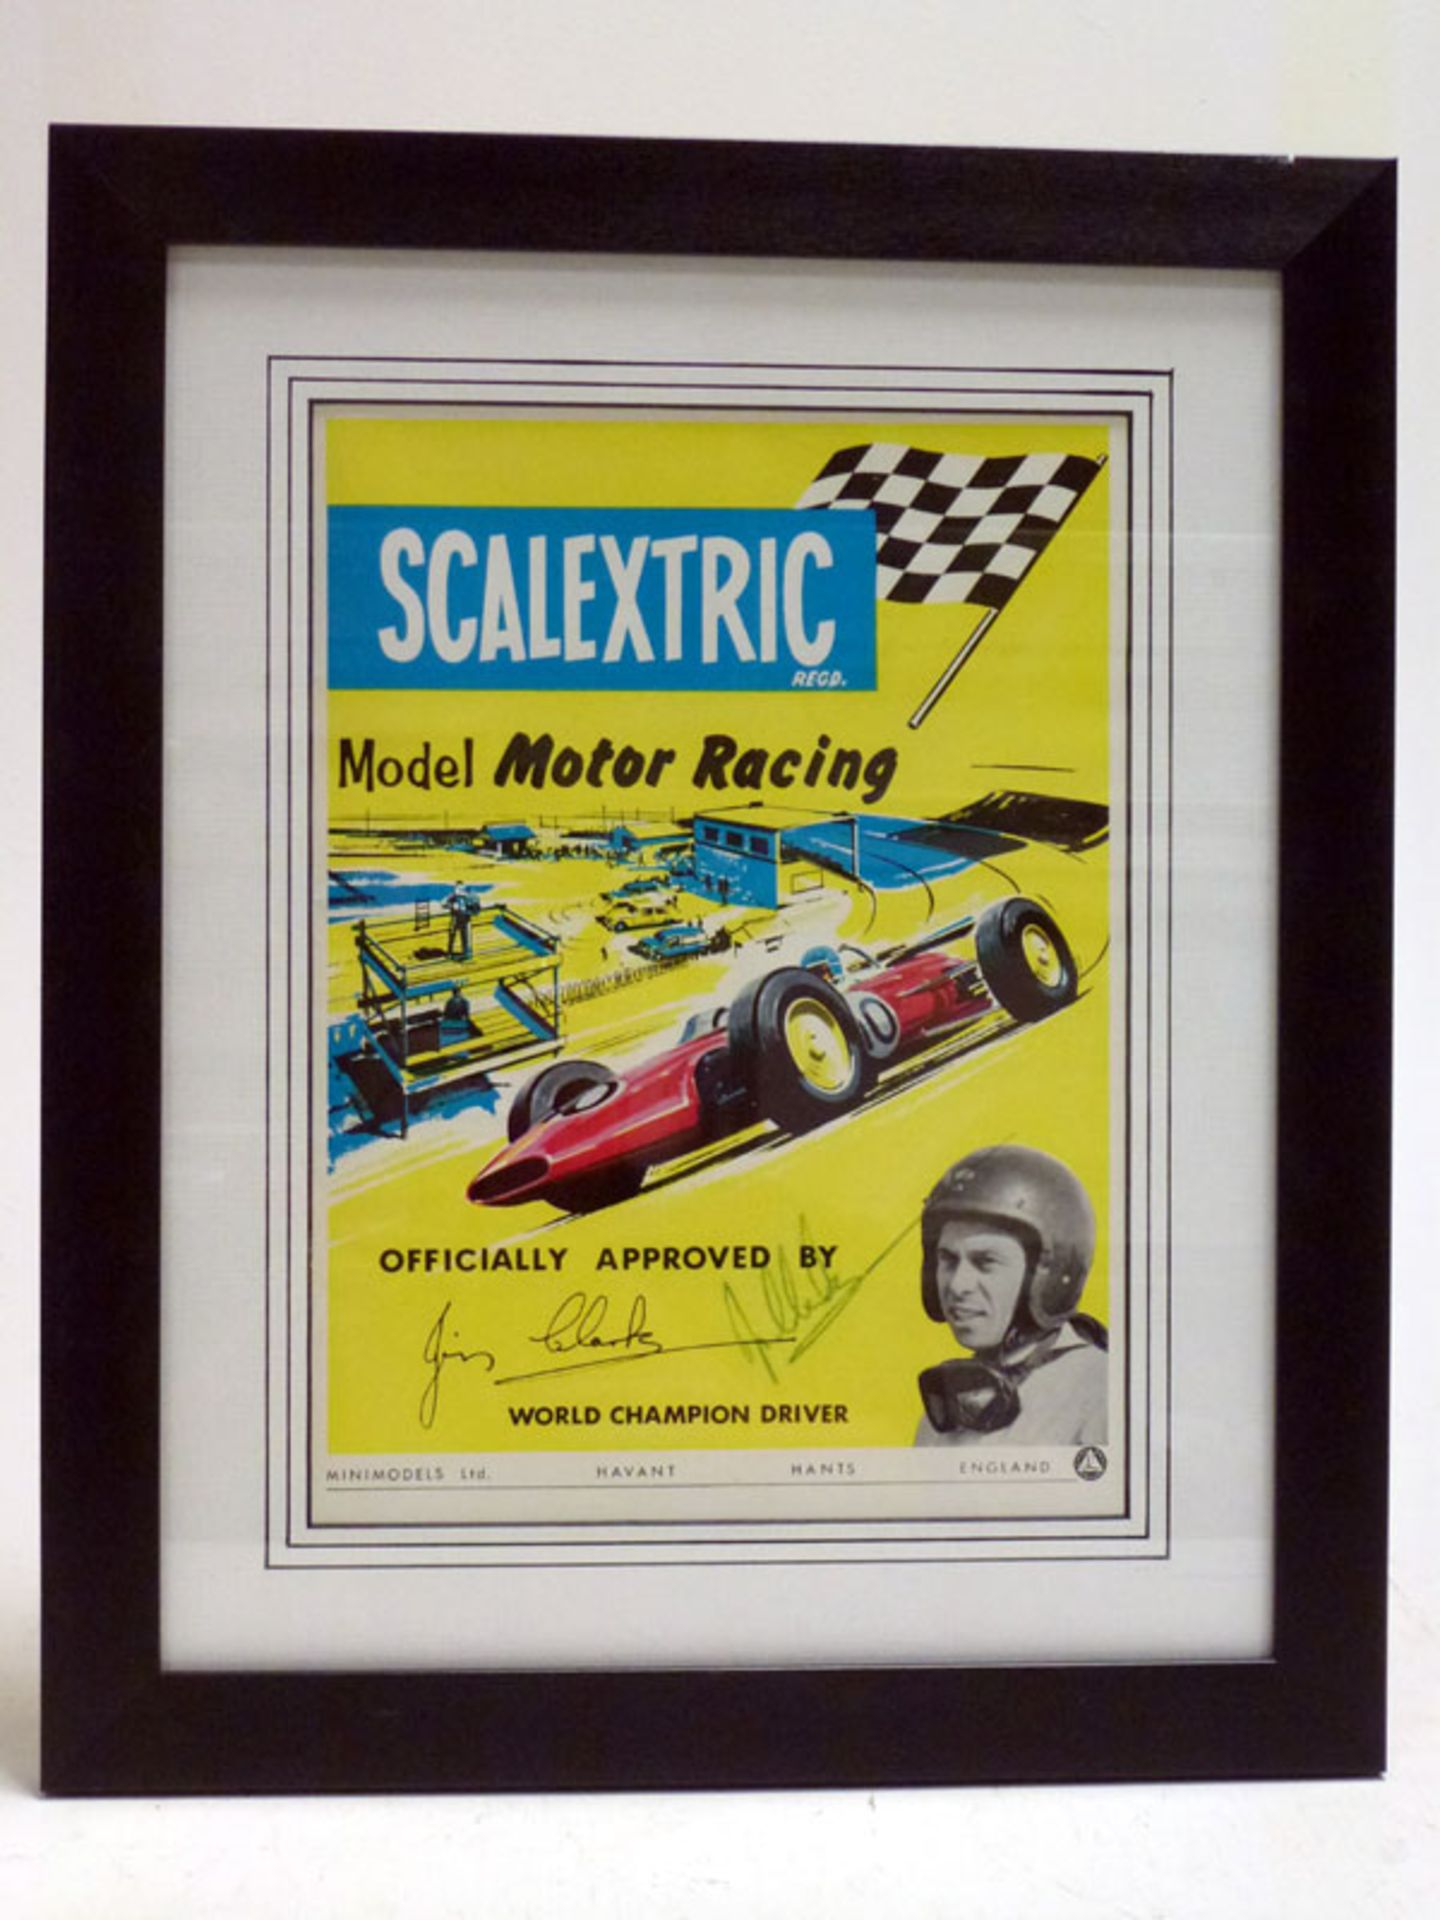 A Scalextric Poster, Signed by Jim Clark